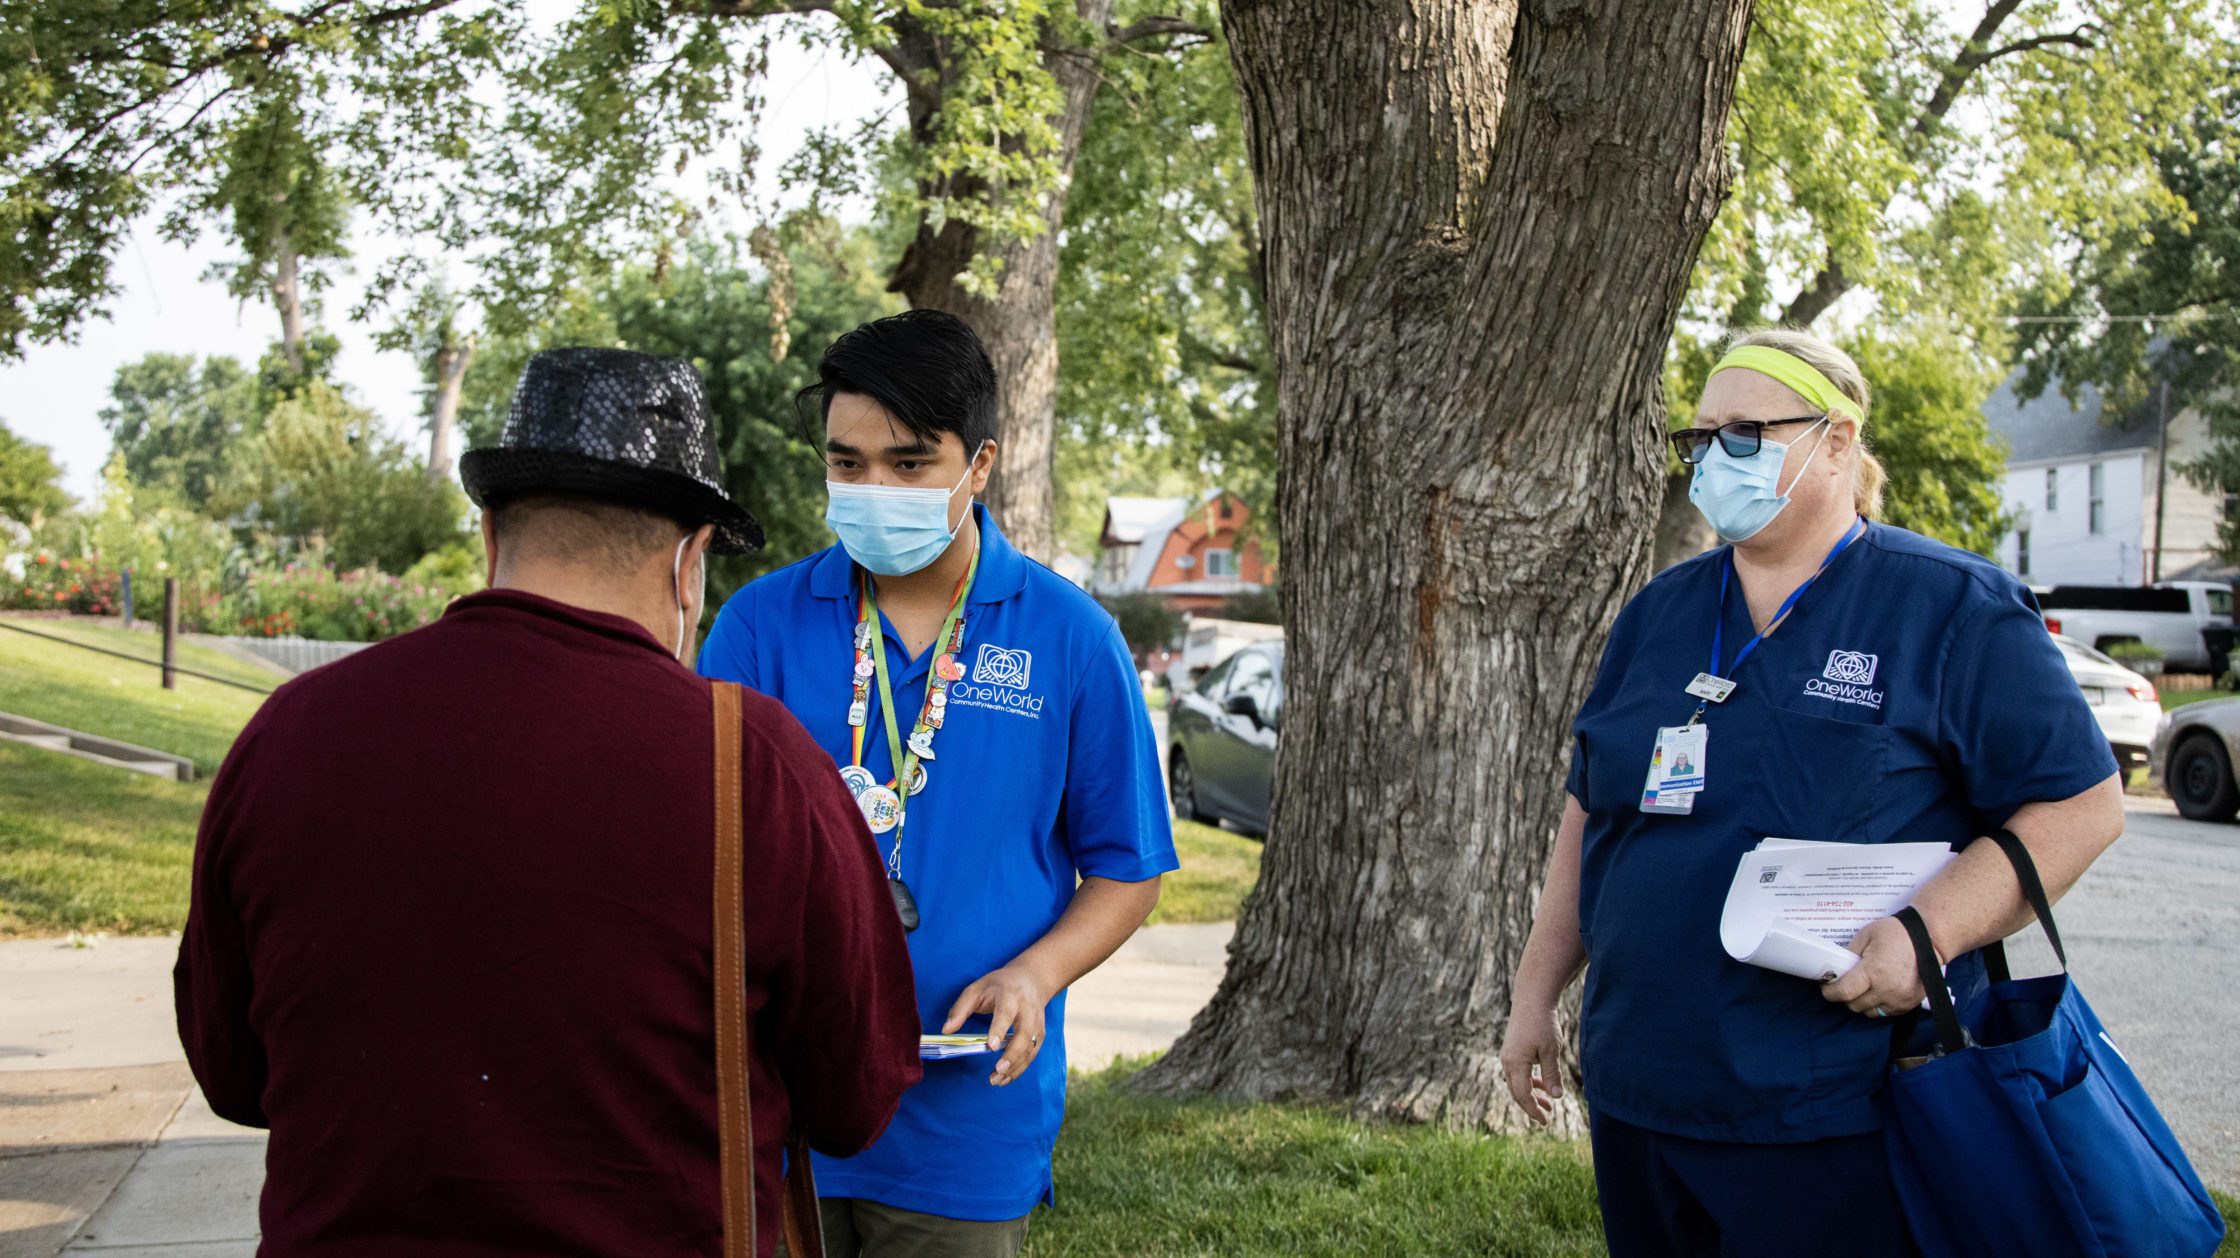 Eddie Nunez and Mary McConnaughey, employees of One World Community Health Centers, talk to a passerby as they go door-to-door in a South Omaha neighborhood, offering residents the COVID-19 vaccine.